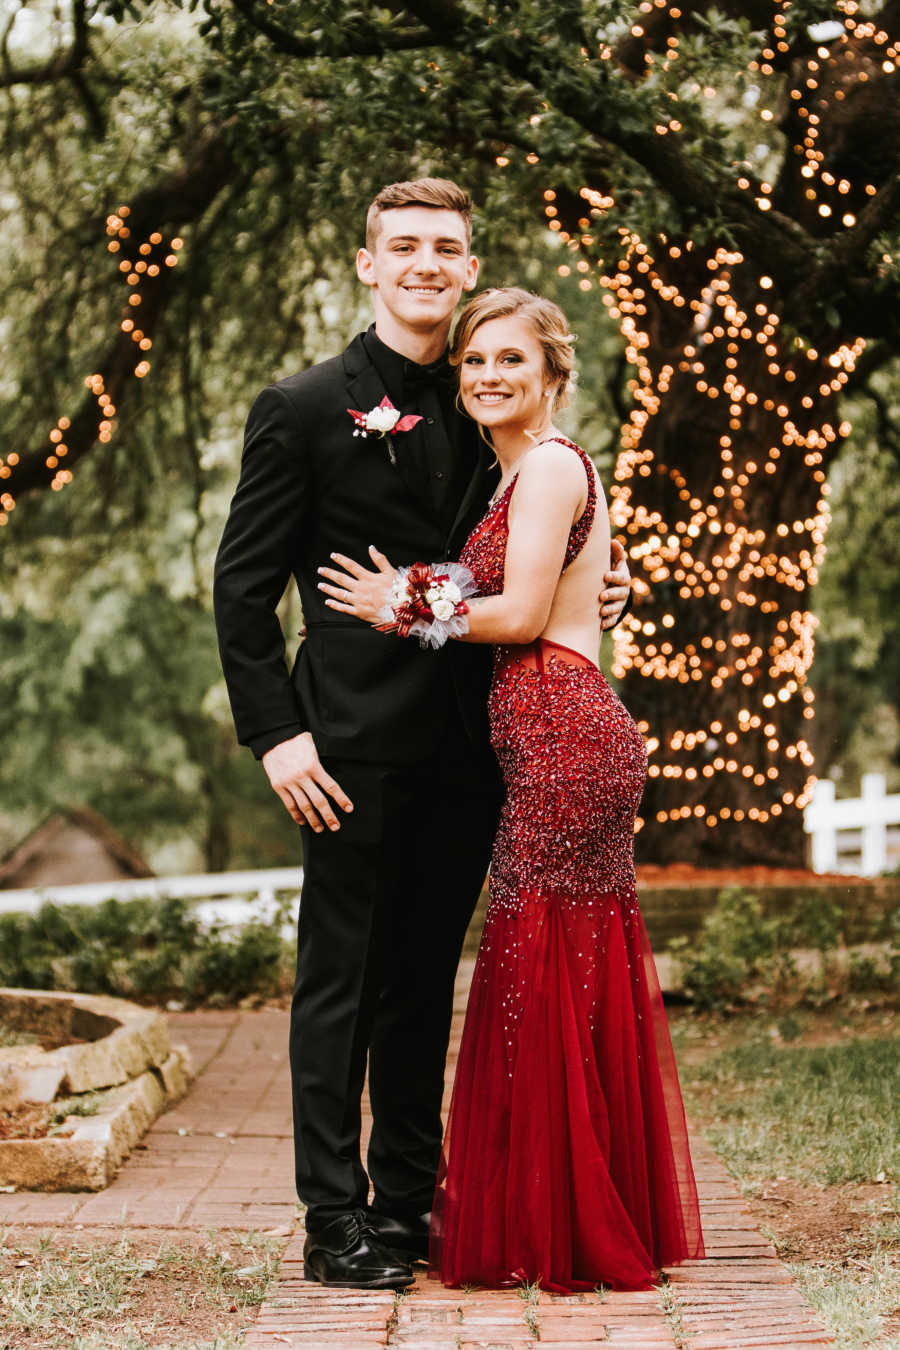 Boyfriend and girlfriend smile with arms wrapped around each other after getting engaged on prom night